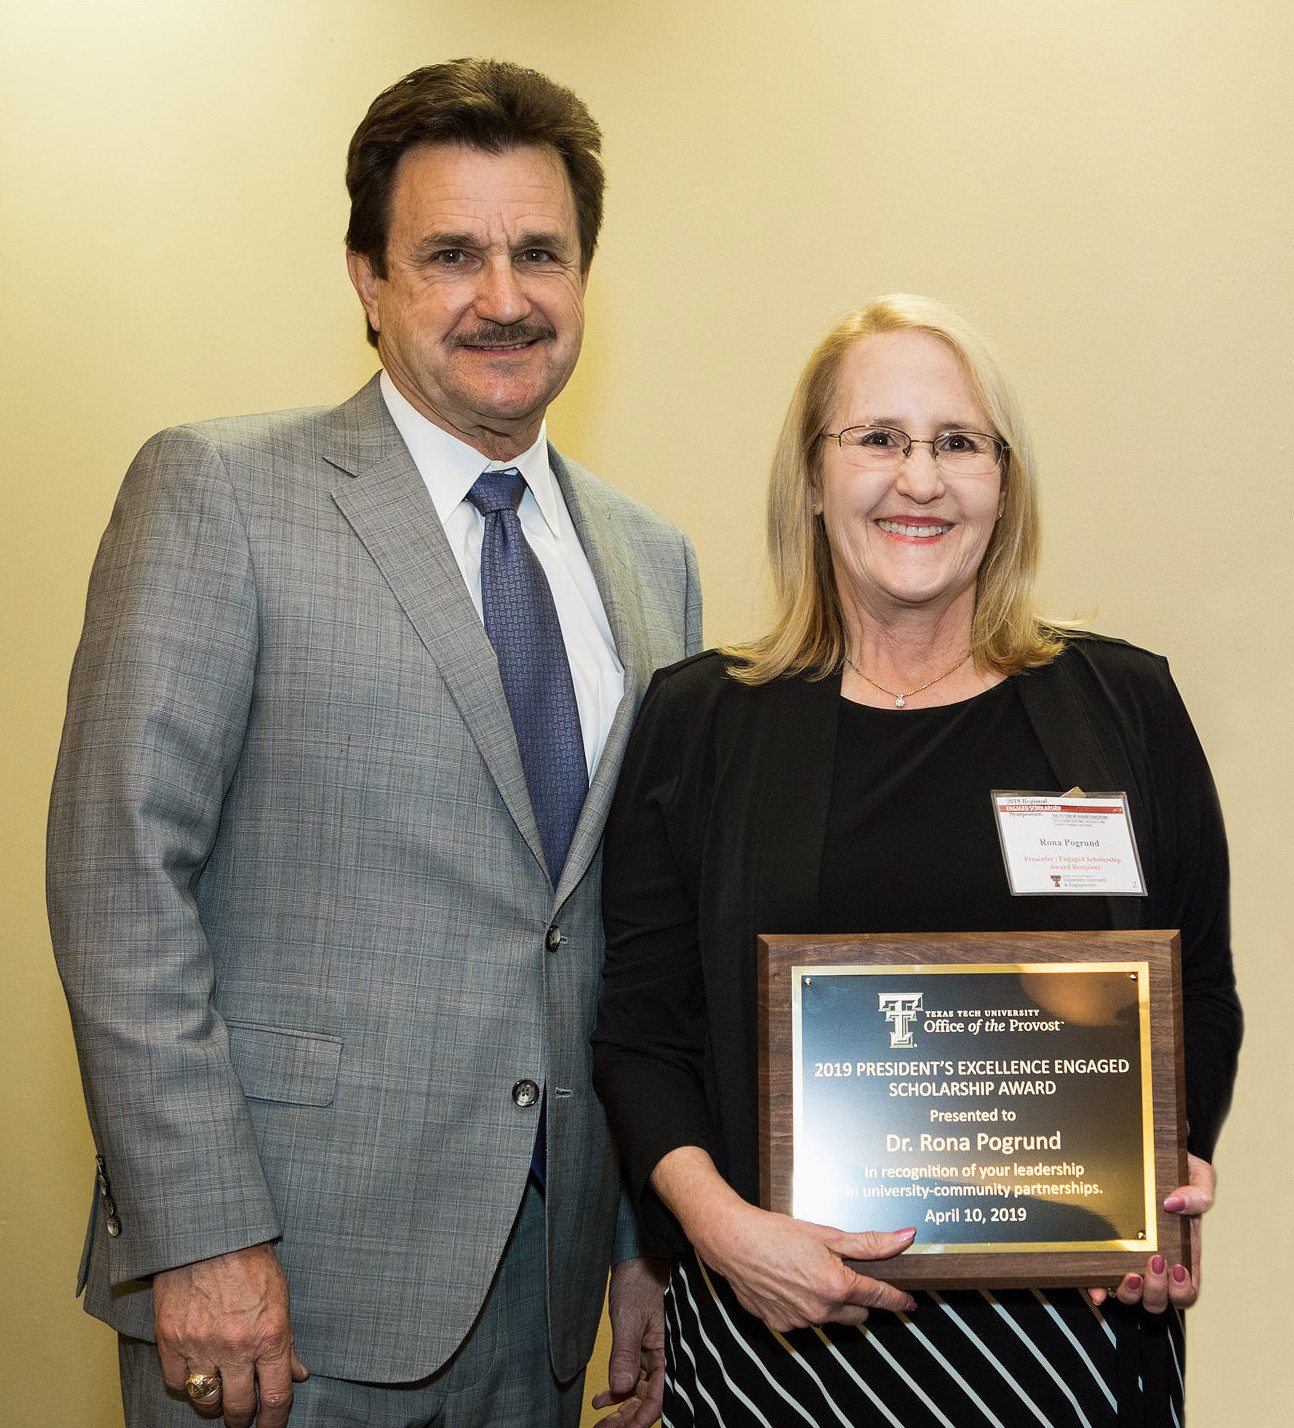 Texas Tech President Lawrence Schovanec presenting Dr. Rona Pogrund with the President's Excellence in Engaged Scholarship Award in 2019